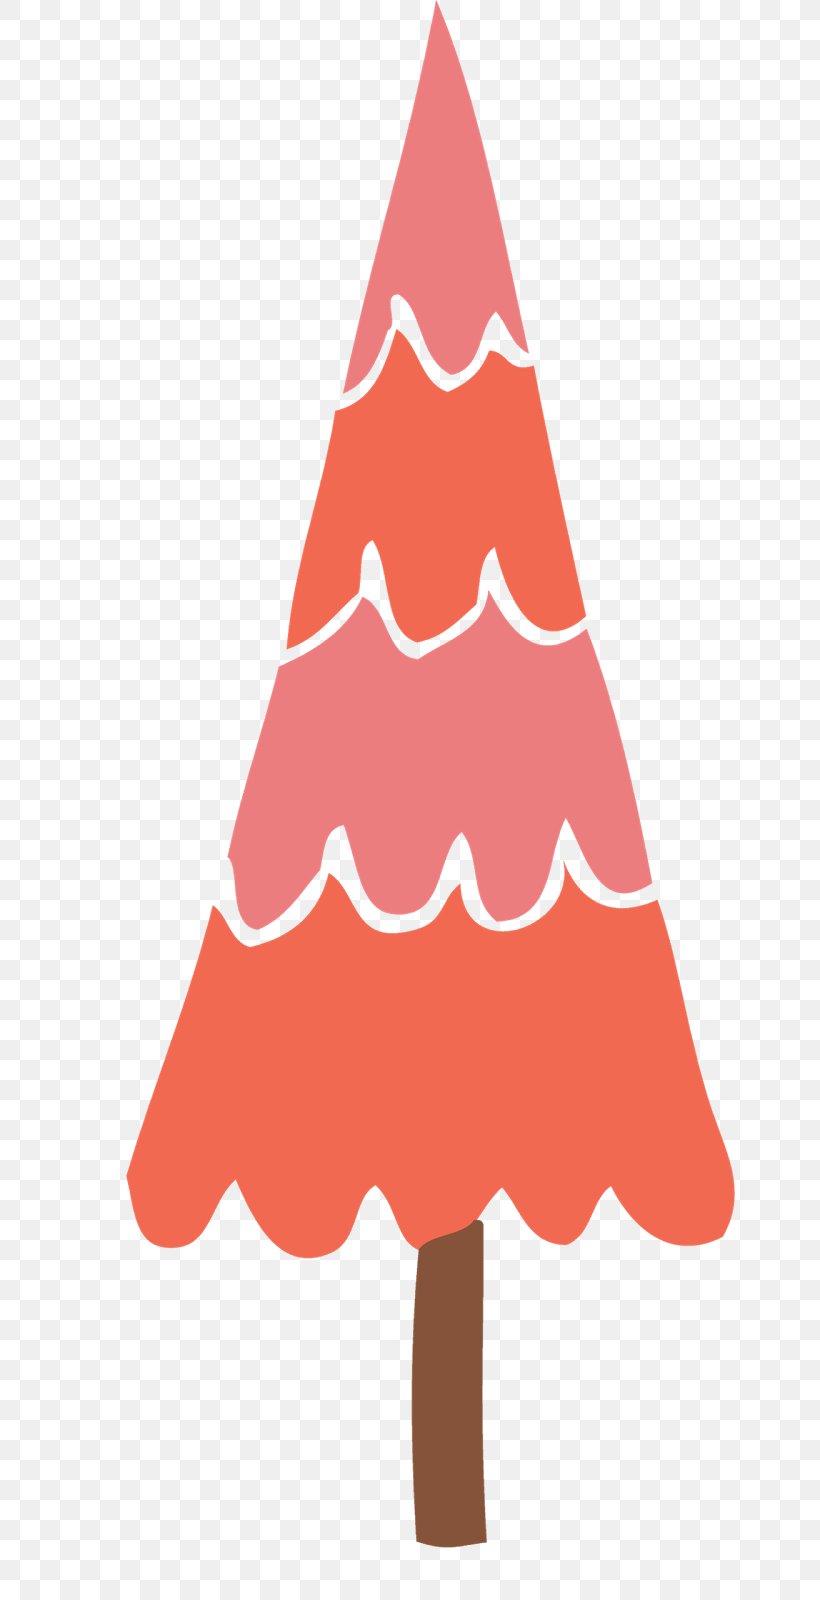 Line Triangle Clip Art, PNG, 650x1600px, Triangle, Tree Download Free